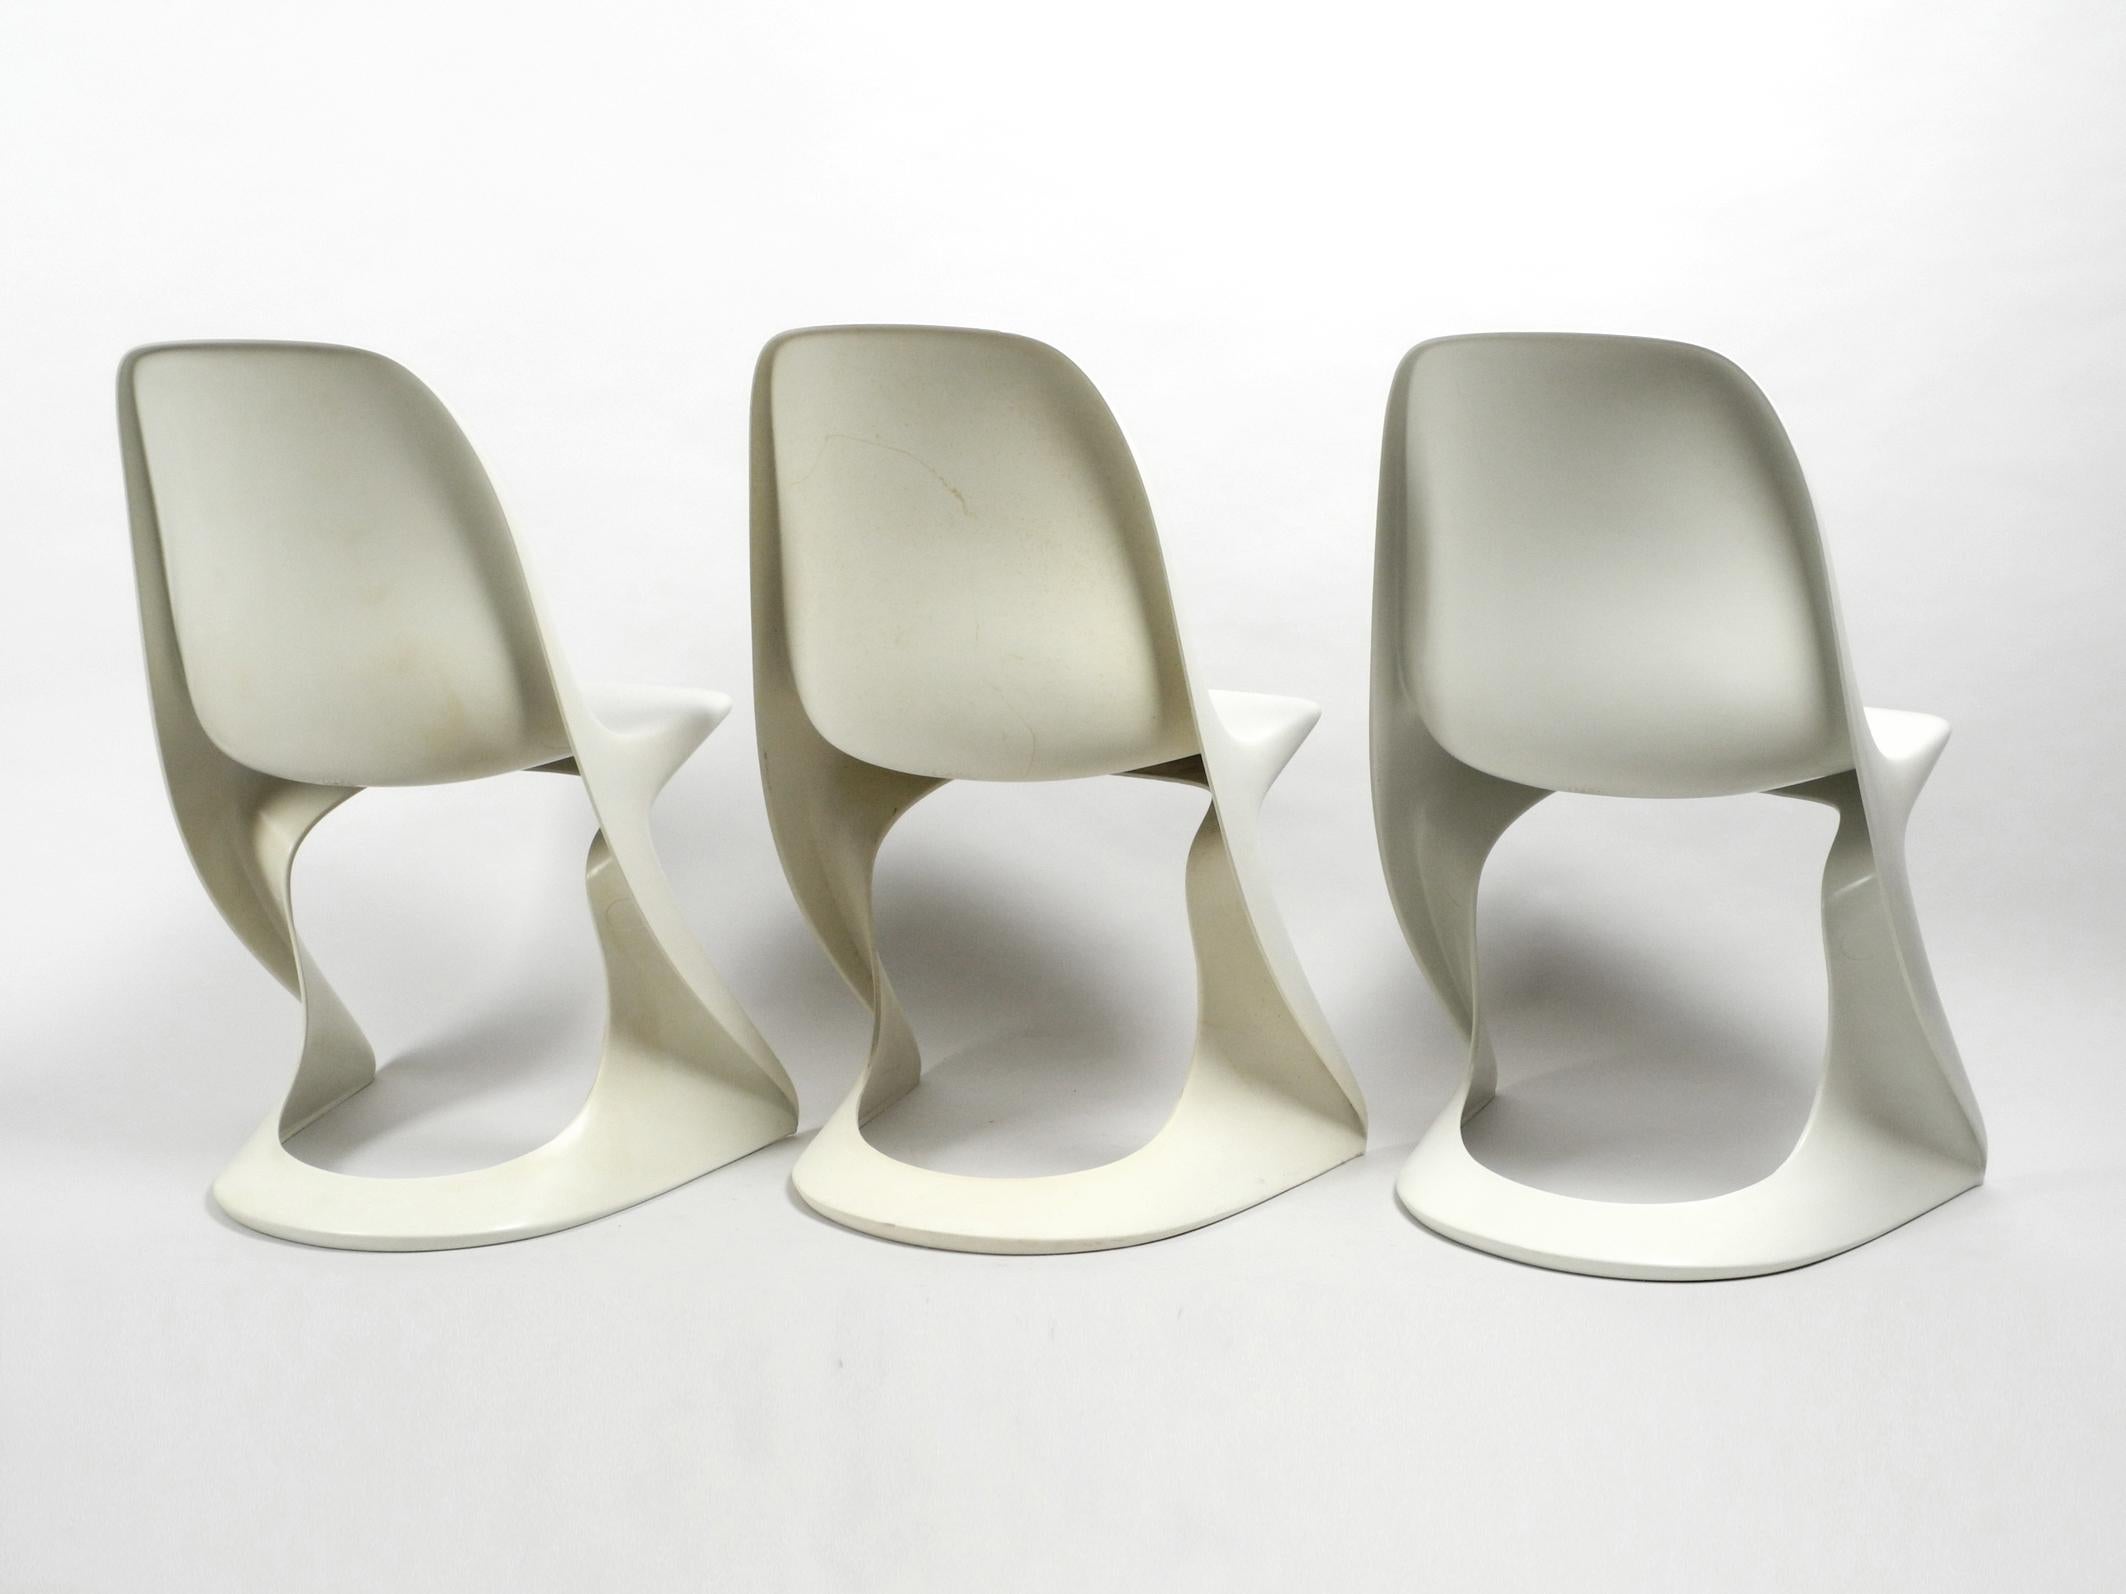 Three Original Casalino Chairs from Casala Model 2004/2005 from 1973 and 1980 9